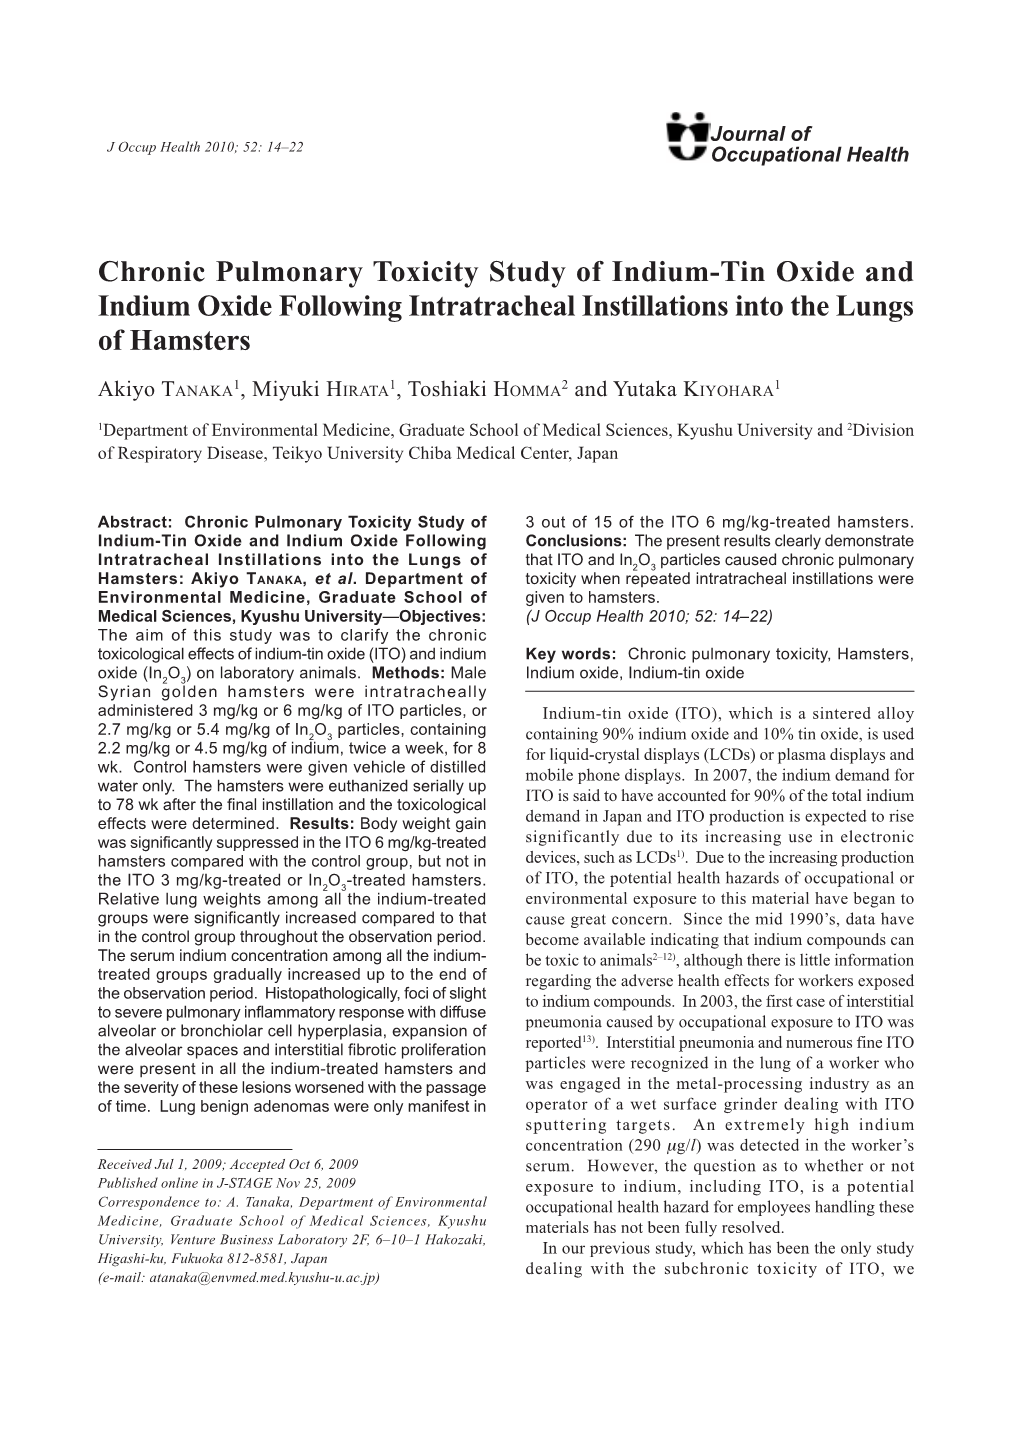 Chronic Pulmonary Toxicity Study of Indium-Tin Oxide and Indium Oxide Following Intratracheal Instillations Into the Lungs of Hamsters